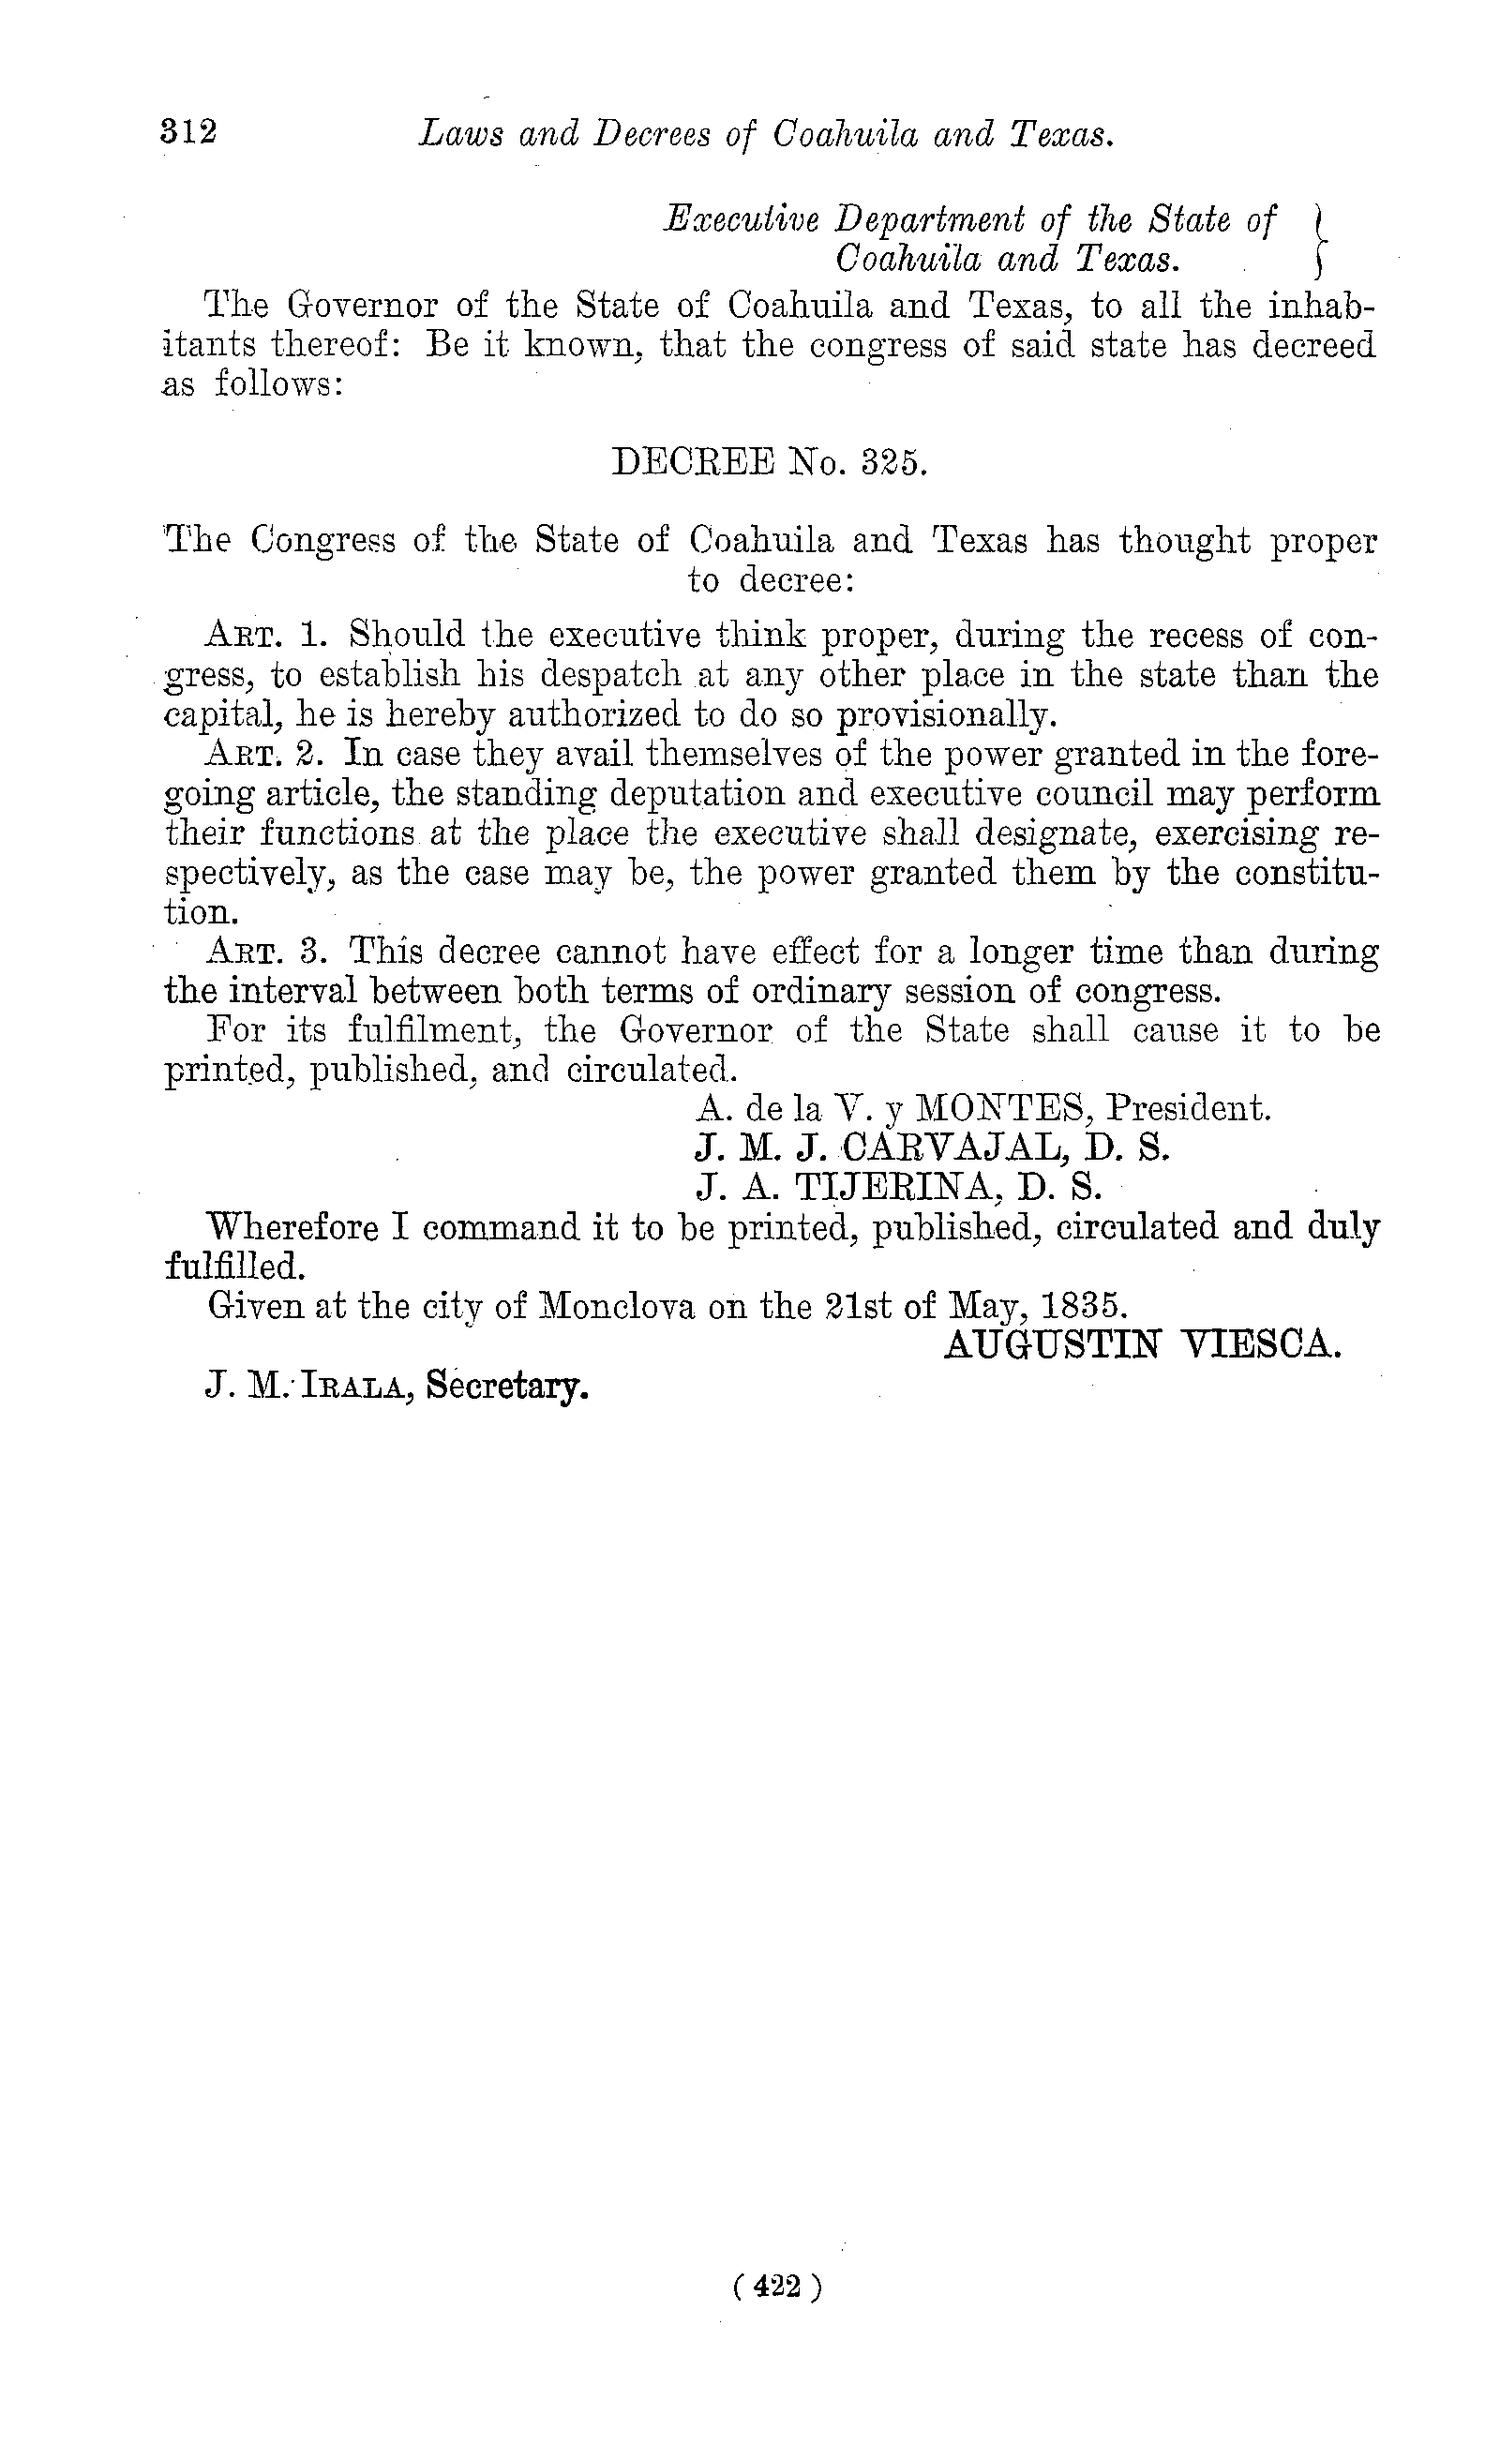 The Laws of Texas, 1822-1897 Volume 1
                                                
                                                    422
                                                